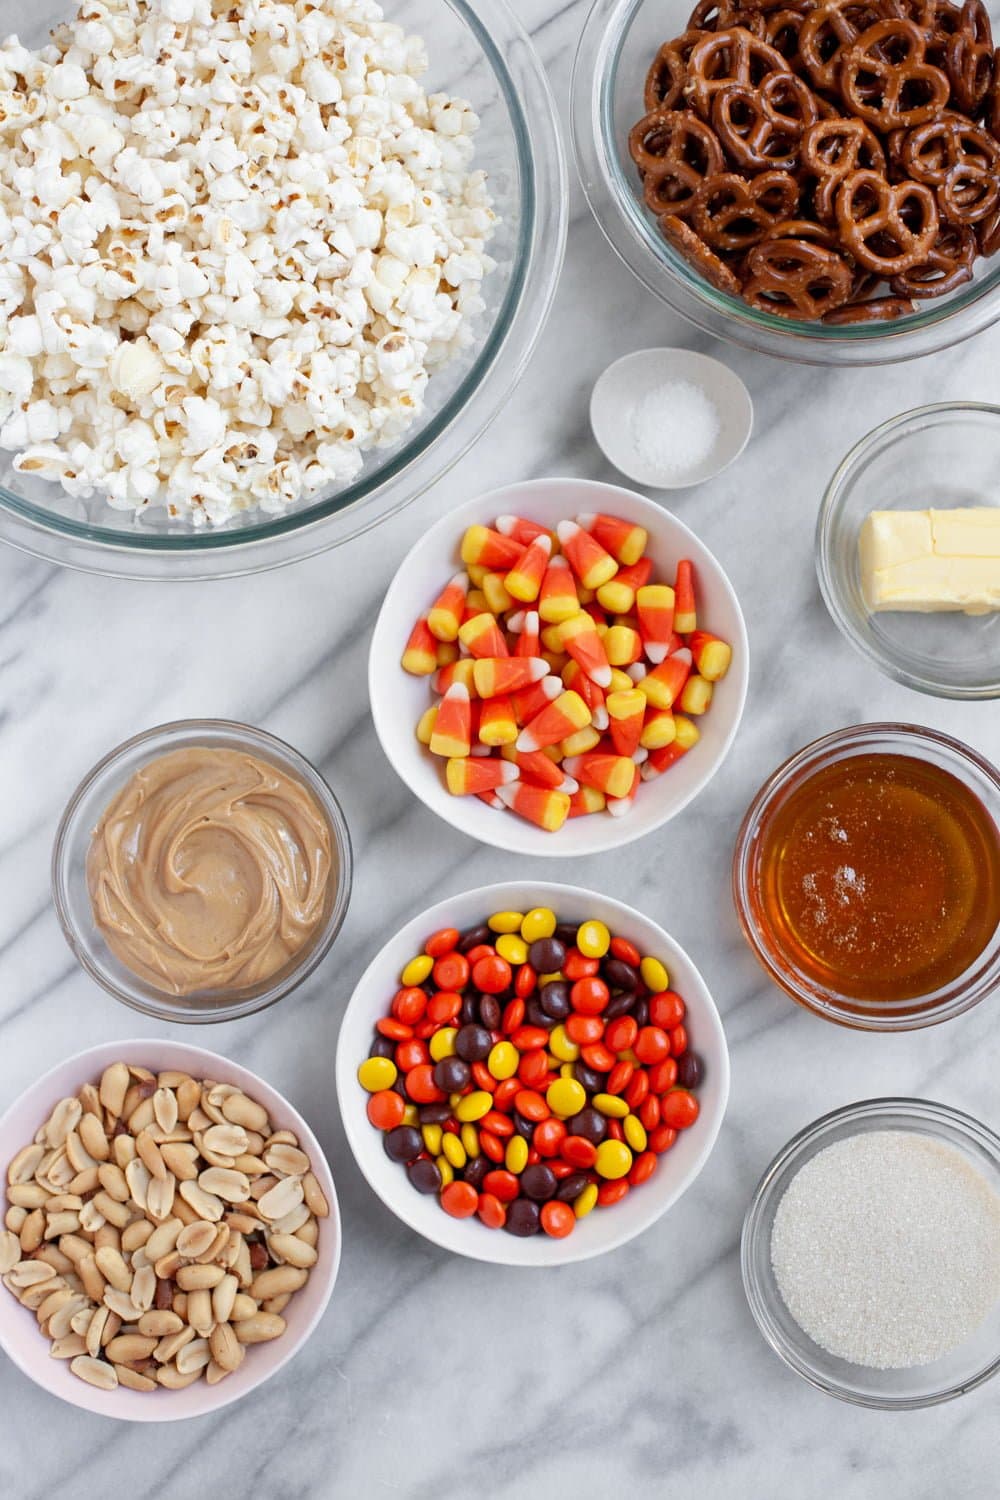 Ingredients for Peanut Butter Monster Munch Halloween Party Mix in individual bowls - popcorn, peanut butter, Reese's Pieces, candy corn